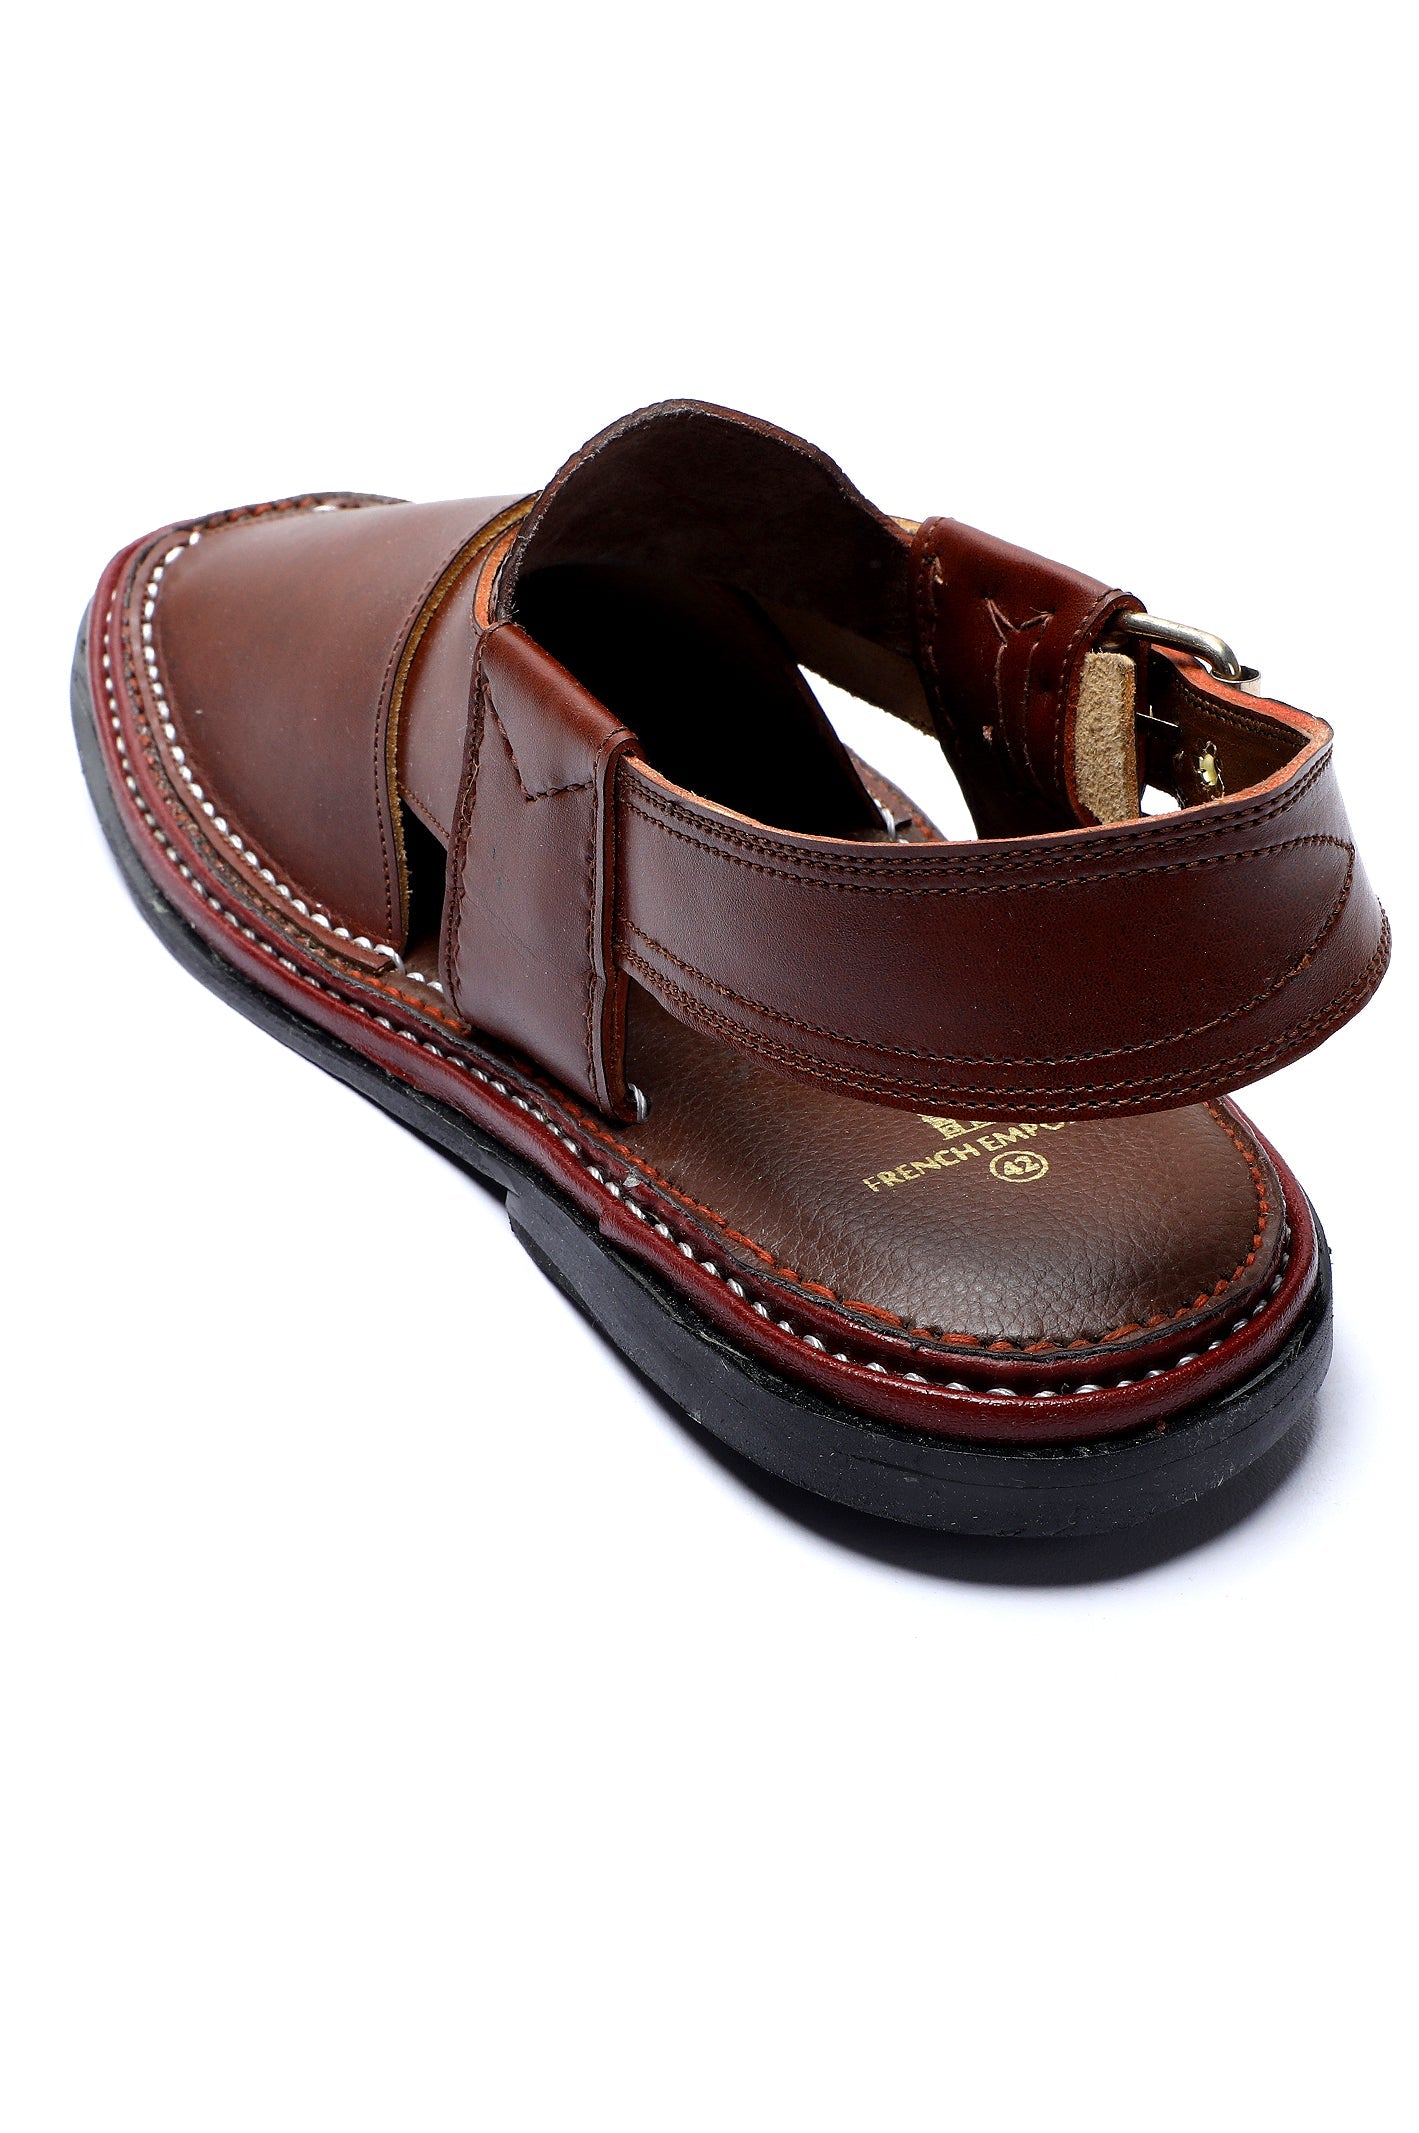 French Emporio Men's Sandal SKU: PSLD-0036-BROWN - Diners